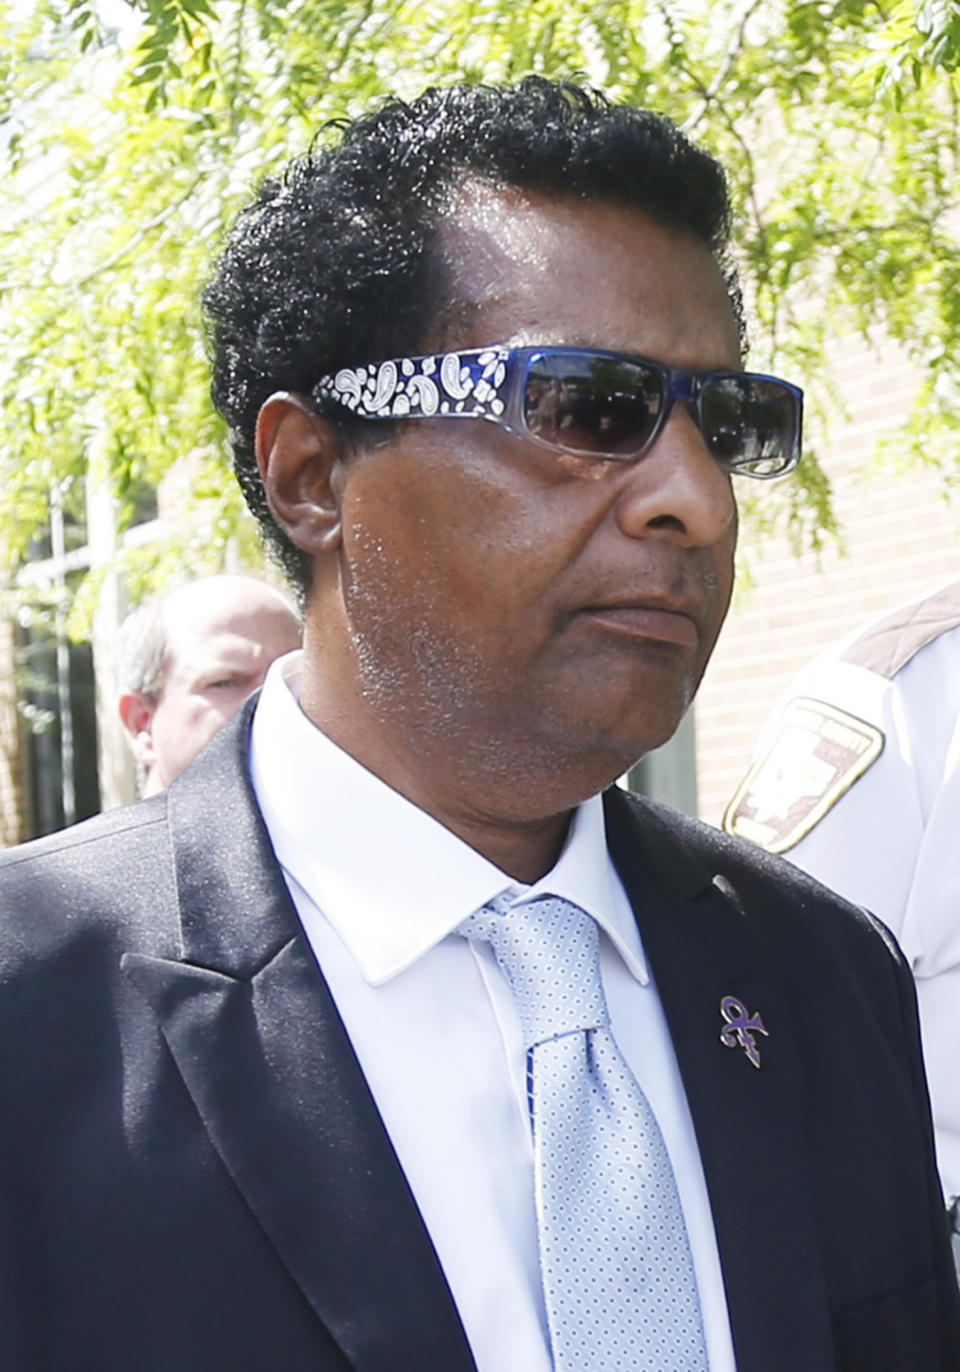 FILE - In this June 27, 2016 file photo, Alfred Jackson, a half-brother of Prince, leaves the Carver County courthouse in Chaska, Minn. after a hearing over how to verify who qualified as Prince's heirs. Jackson, 66, one of the six heirs to the Prince estate, has died, leaving five Prince siblings to share in the late rock superstar's fortune. (AP Photo/Jim Mone,File)